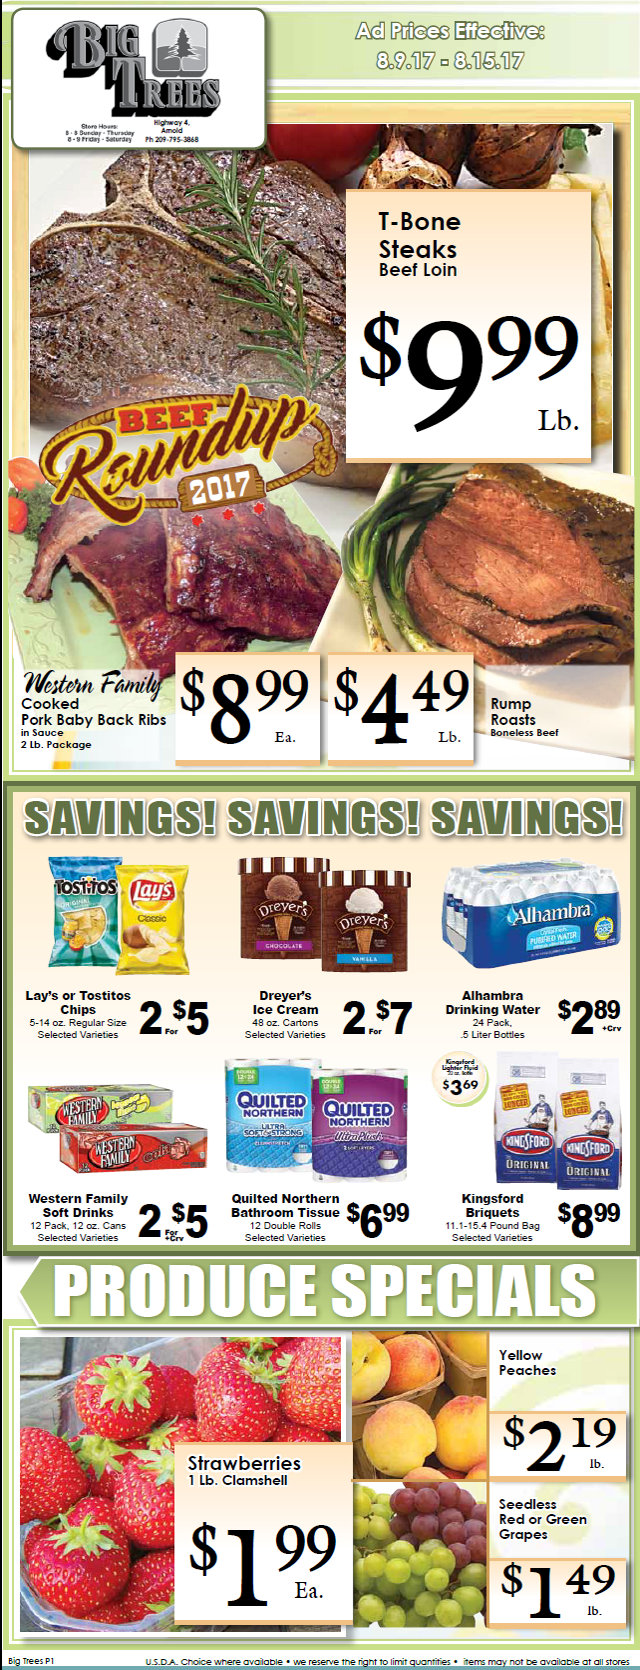 Big Trees Market Weekly Ad & Specials Through August 15th